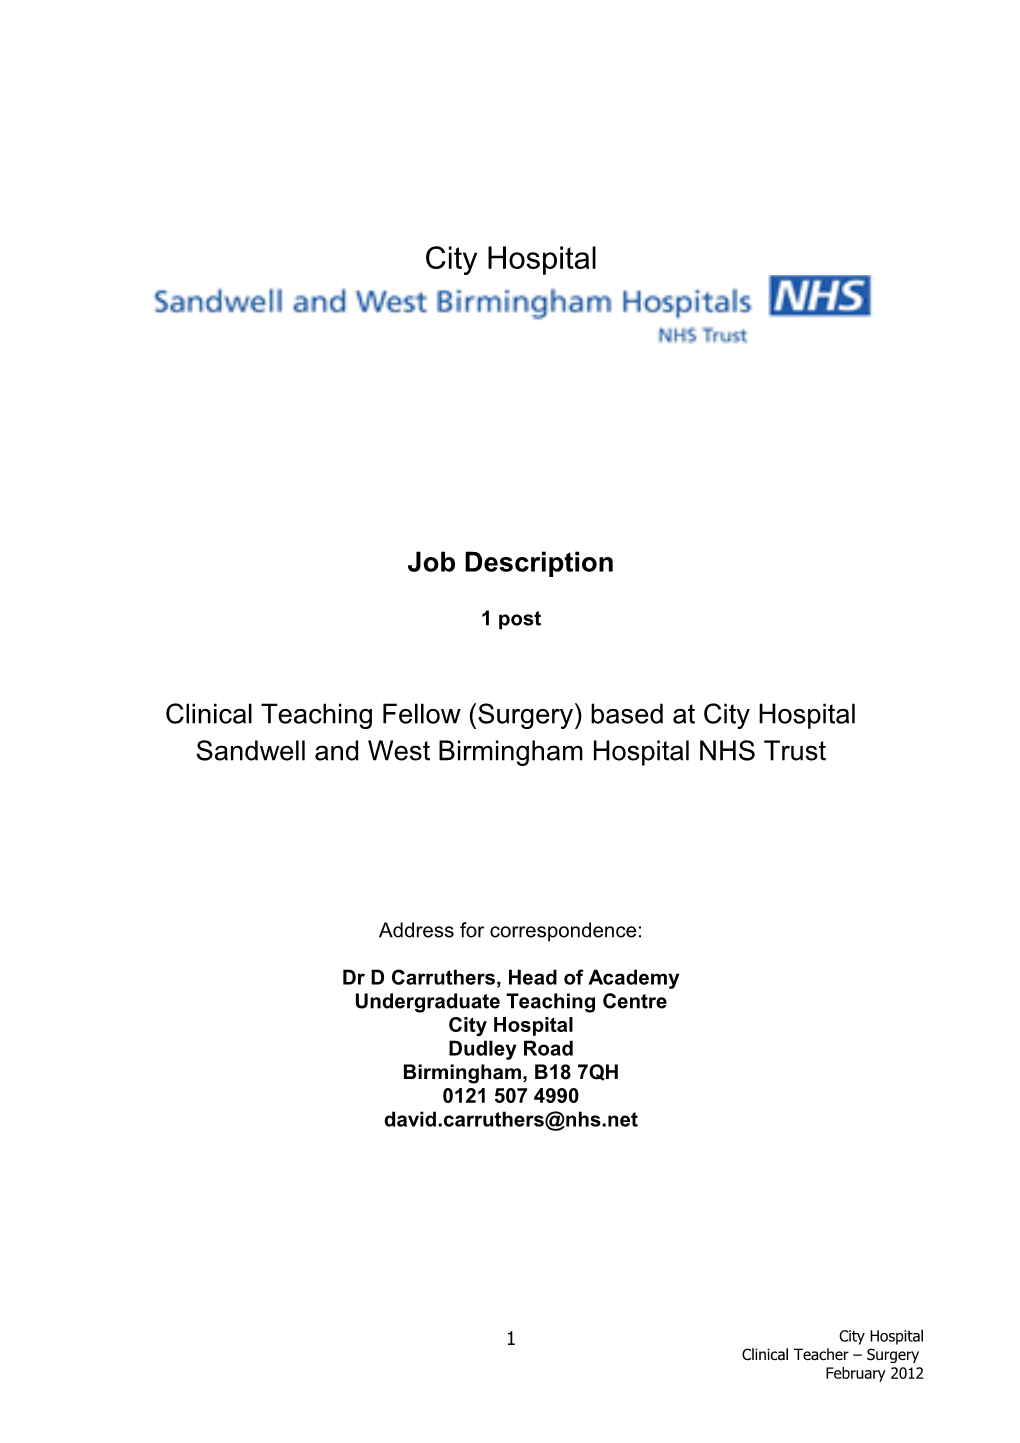 Clinical Teaching Fellow (Surgery) Based at Cityhospital